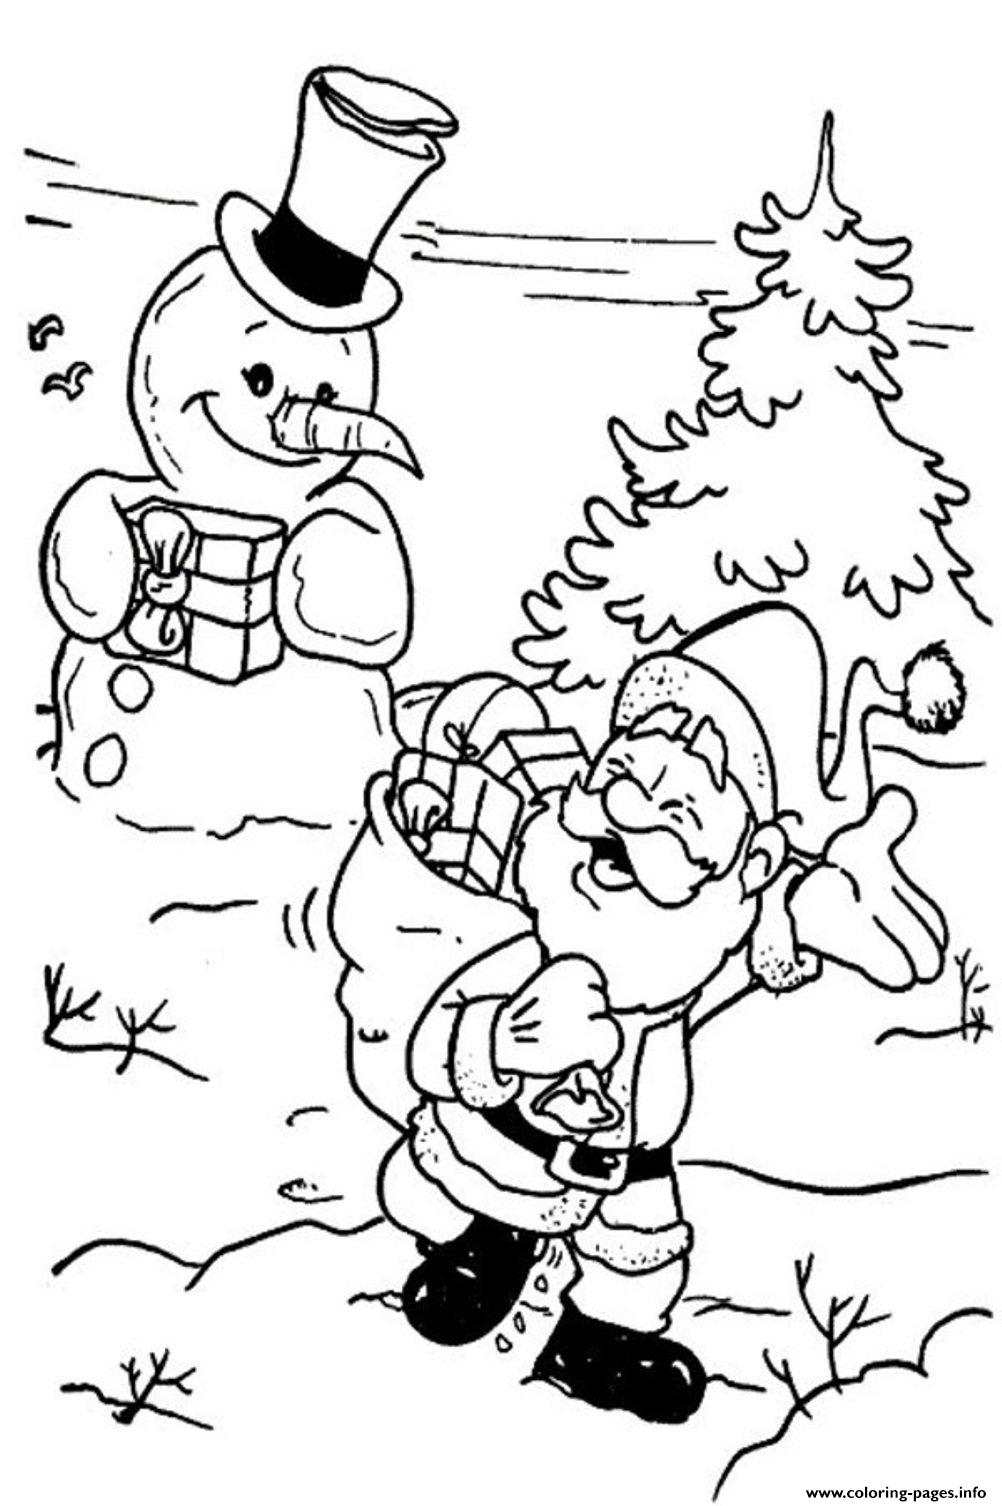 Santa Gives A Gift For Snowman In Christmas S Printable4244 coloring